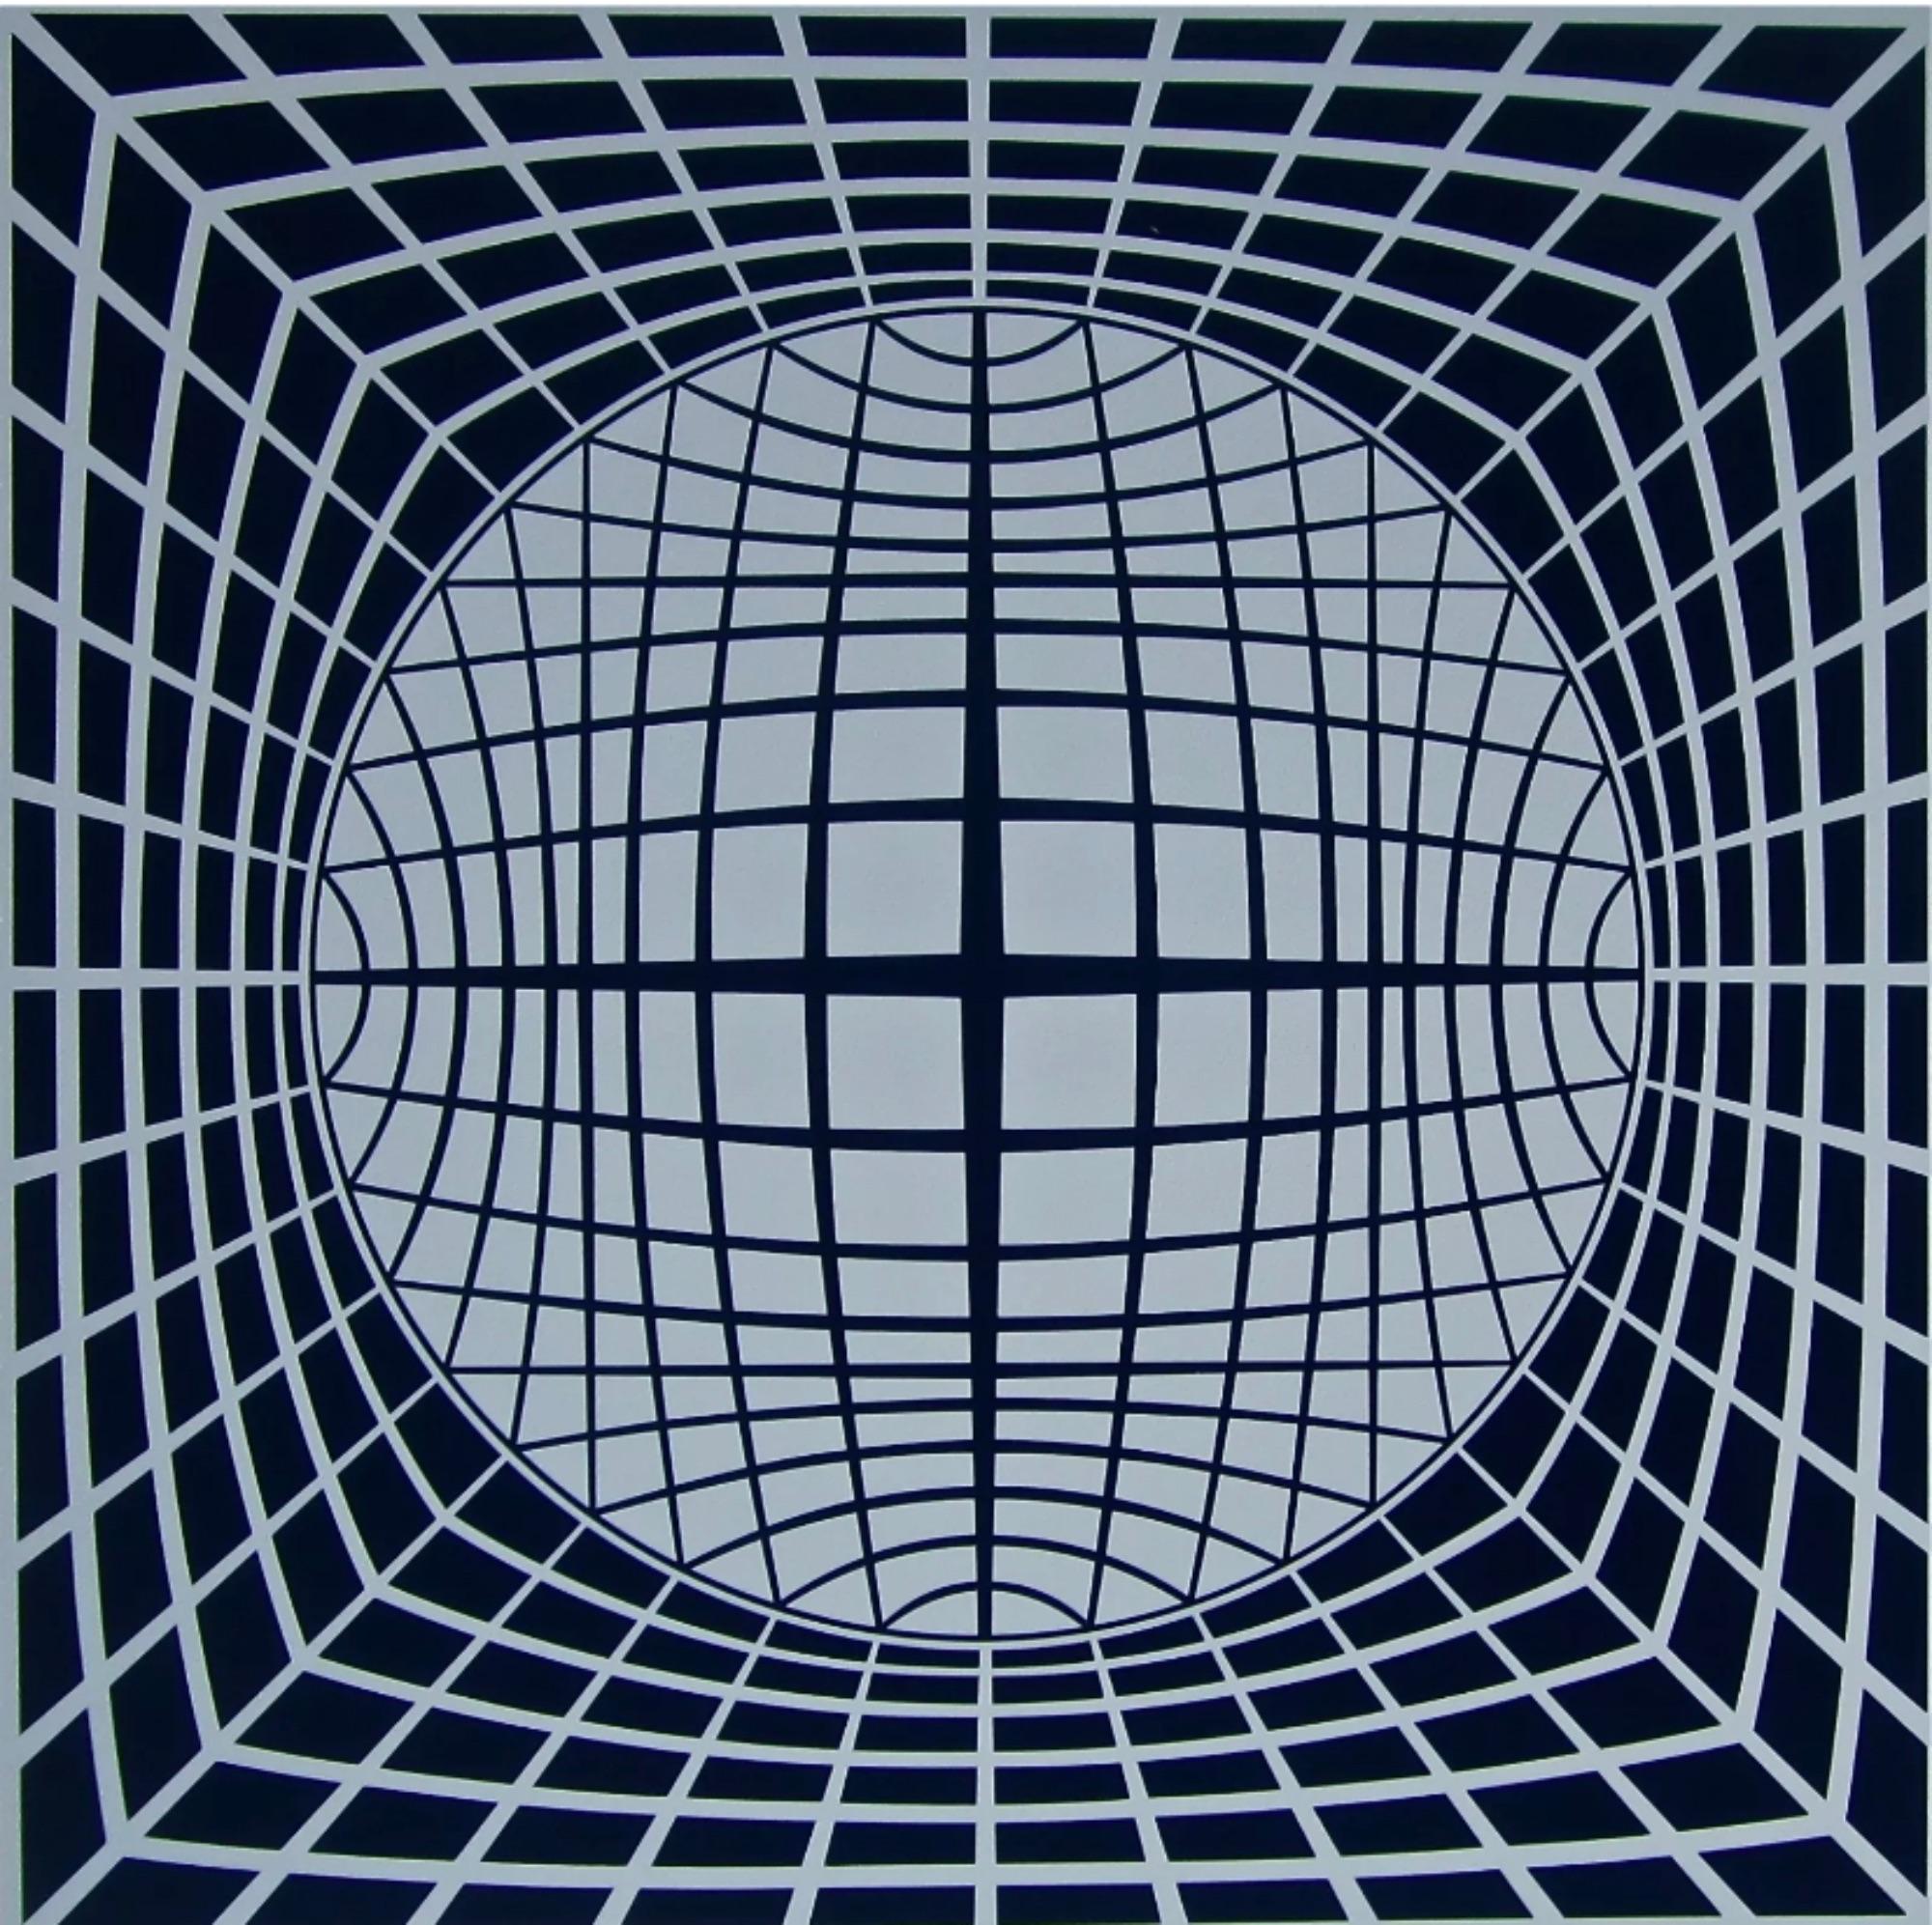 Artist: Victor Vasarely (1908-1997)
Title: TR-UR
Year: 1980
Medium: Silkscreen on Arches paper
Edition: 116/250, plus proofs
Size: 39.25 x 30.75 inches
Condition: Good
Inscription: Signed and numbered by the artist.
Notes:  Published by Atelier